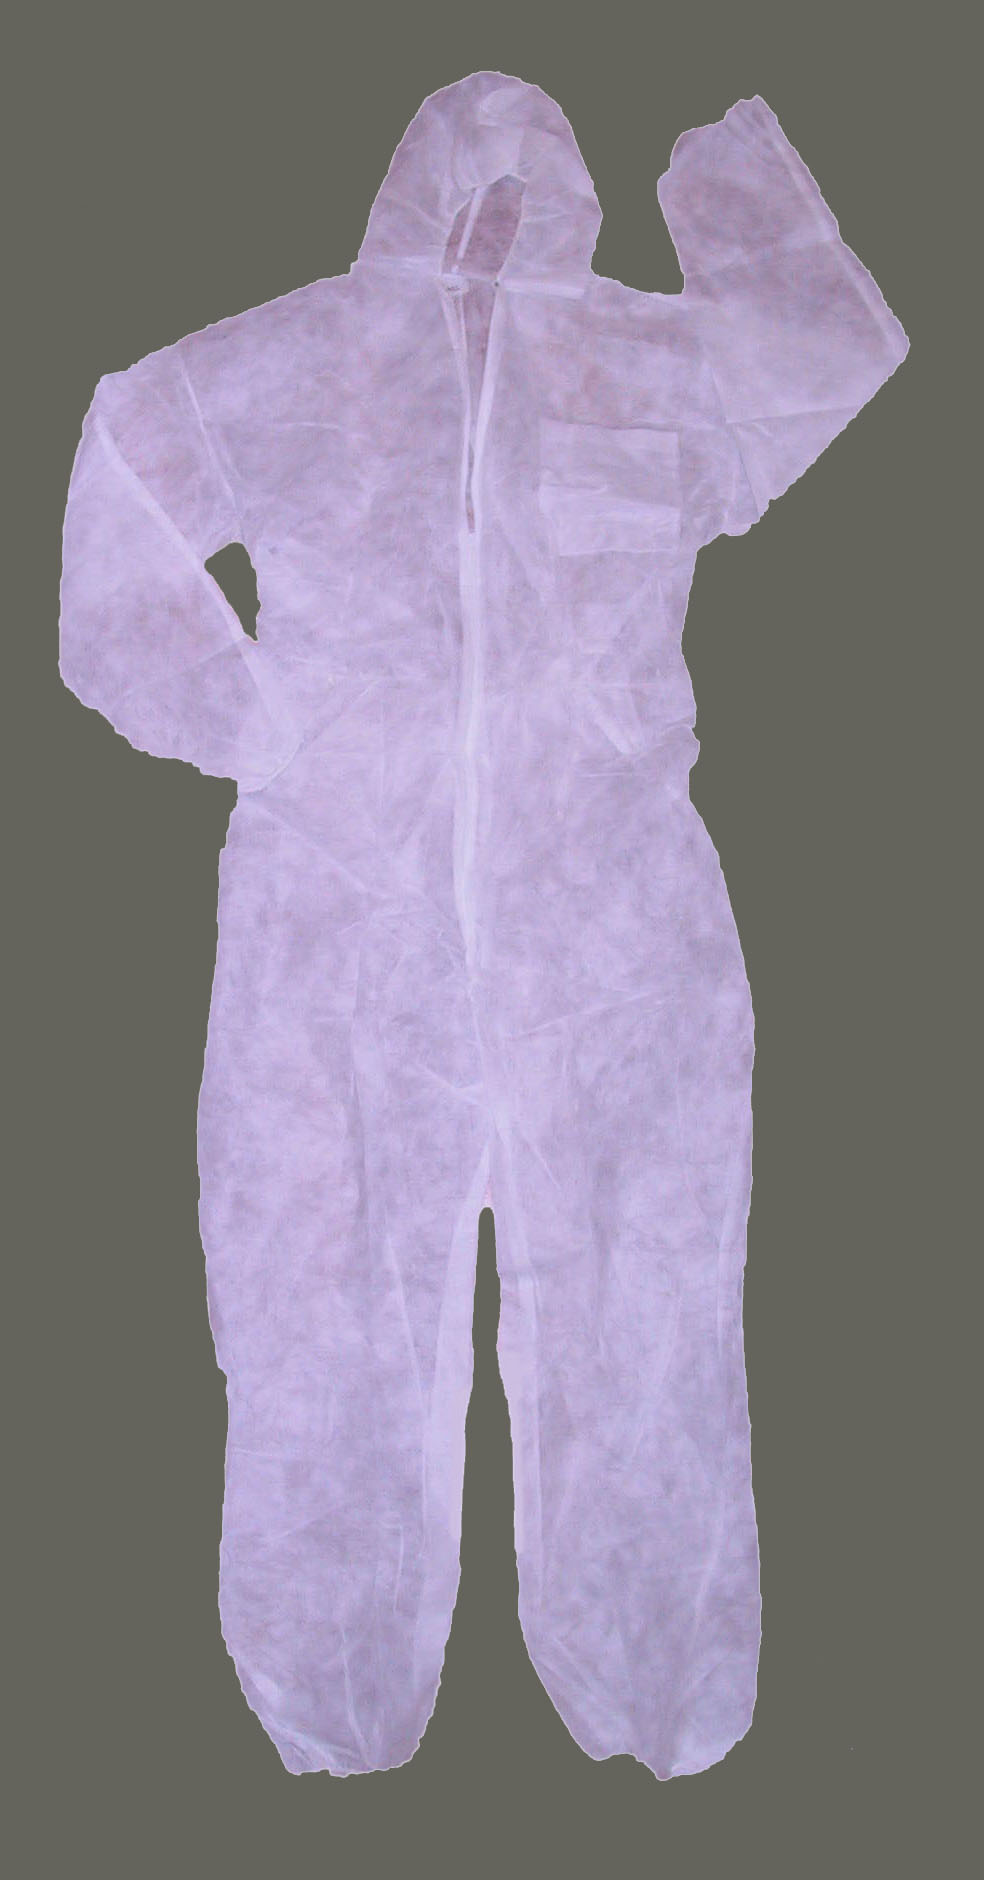 OverAlls & Coveralls for Auto Spray Painting - case of 25